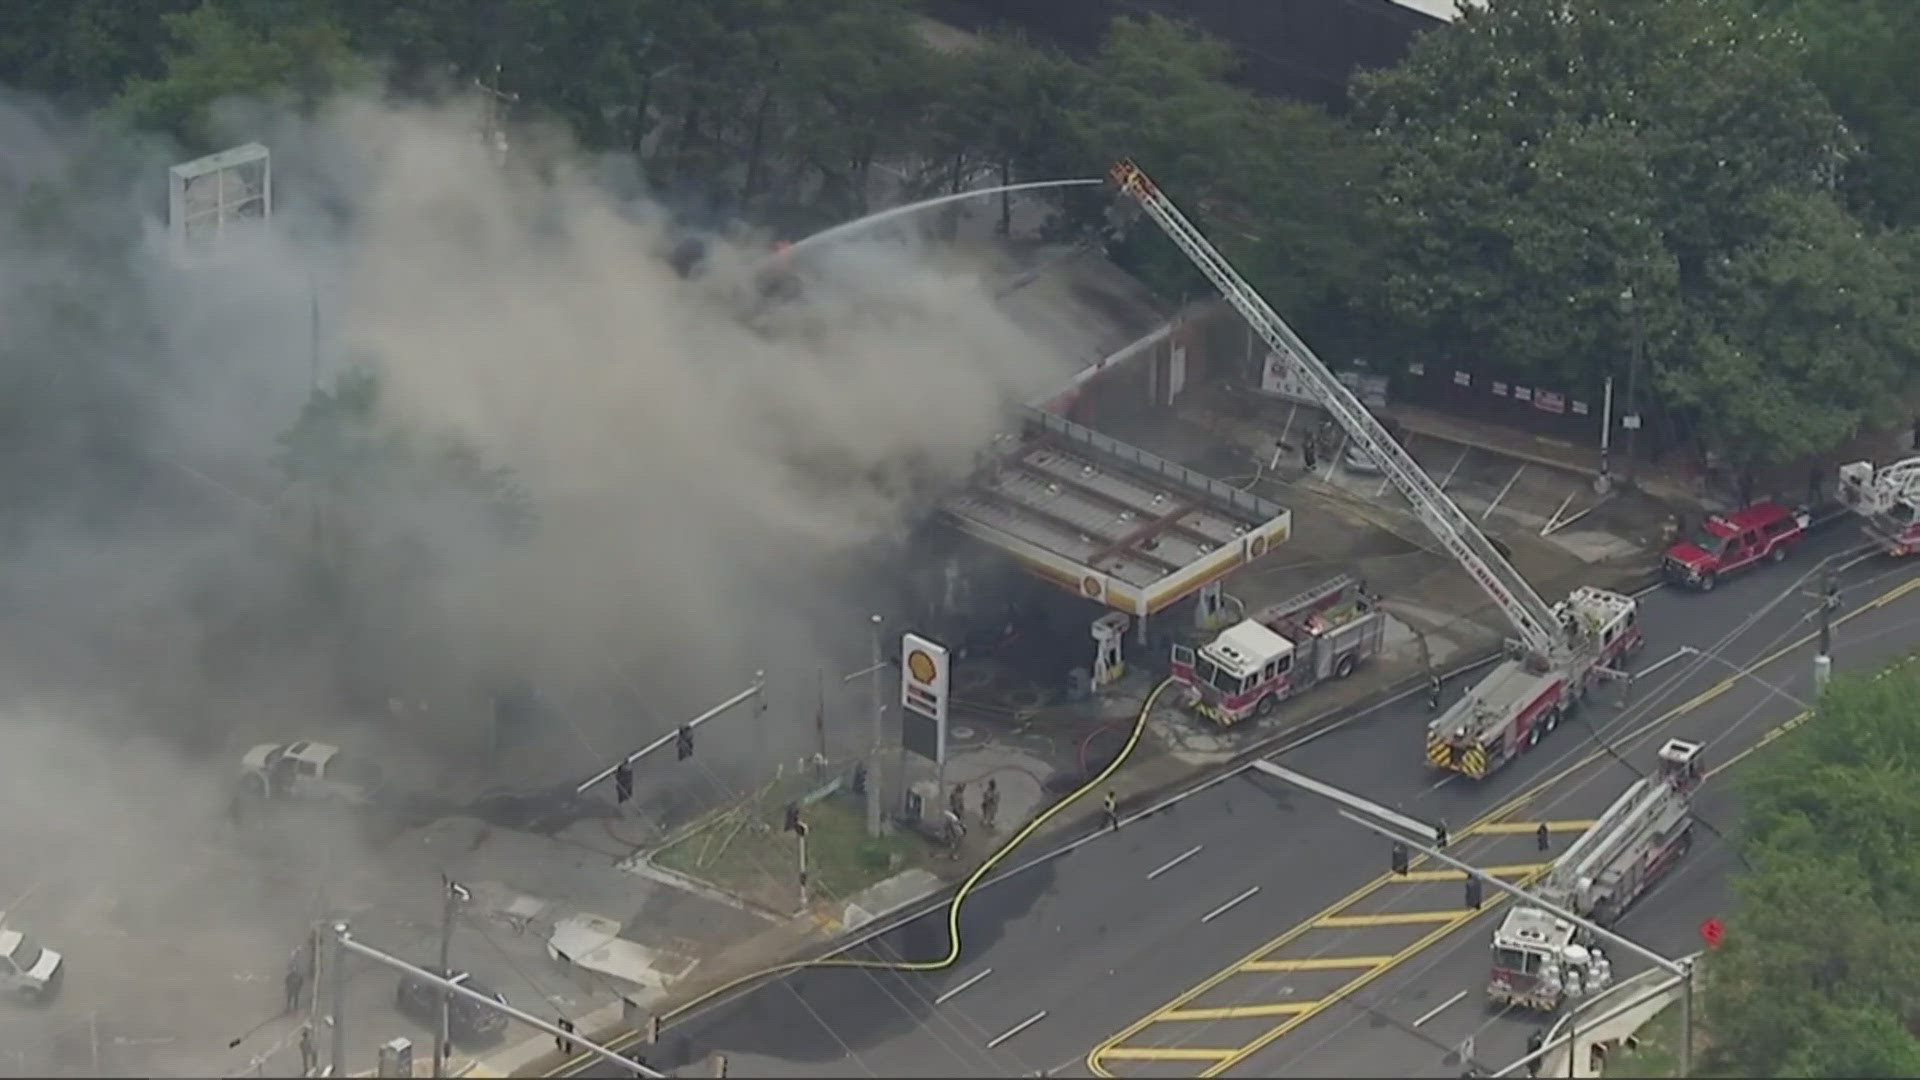 11Alive SkyTracker flew over a shell gas station along Northside Drive, where heavy smoke can be seen as firefighters work to extinguish the flames.